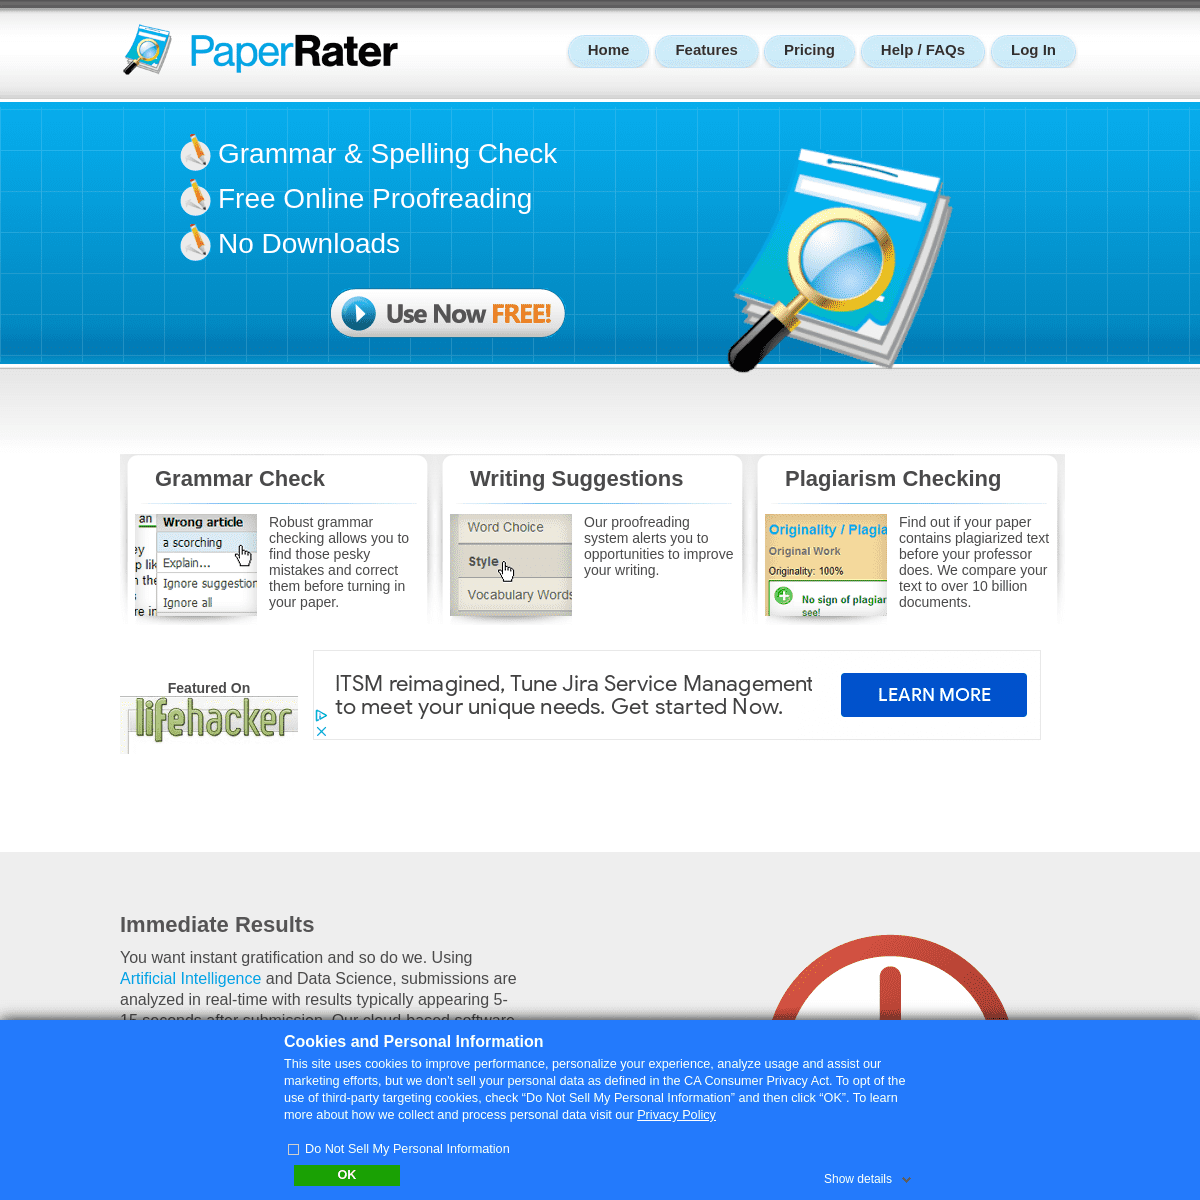 A complete backup of https://paperrater.com